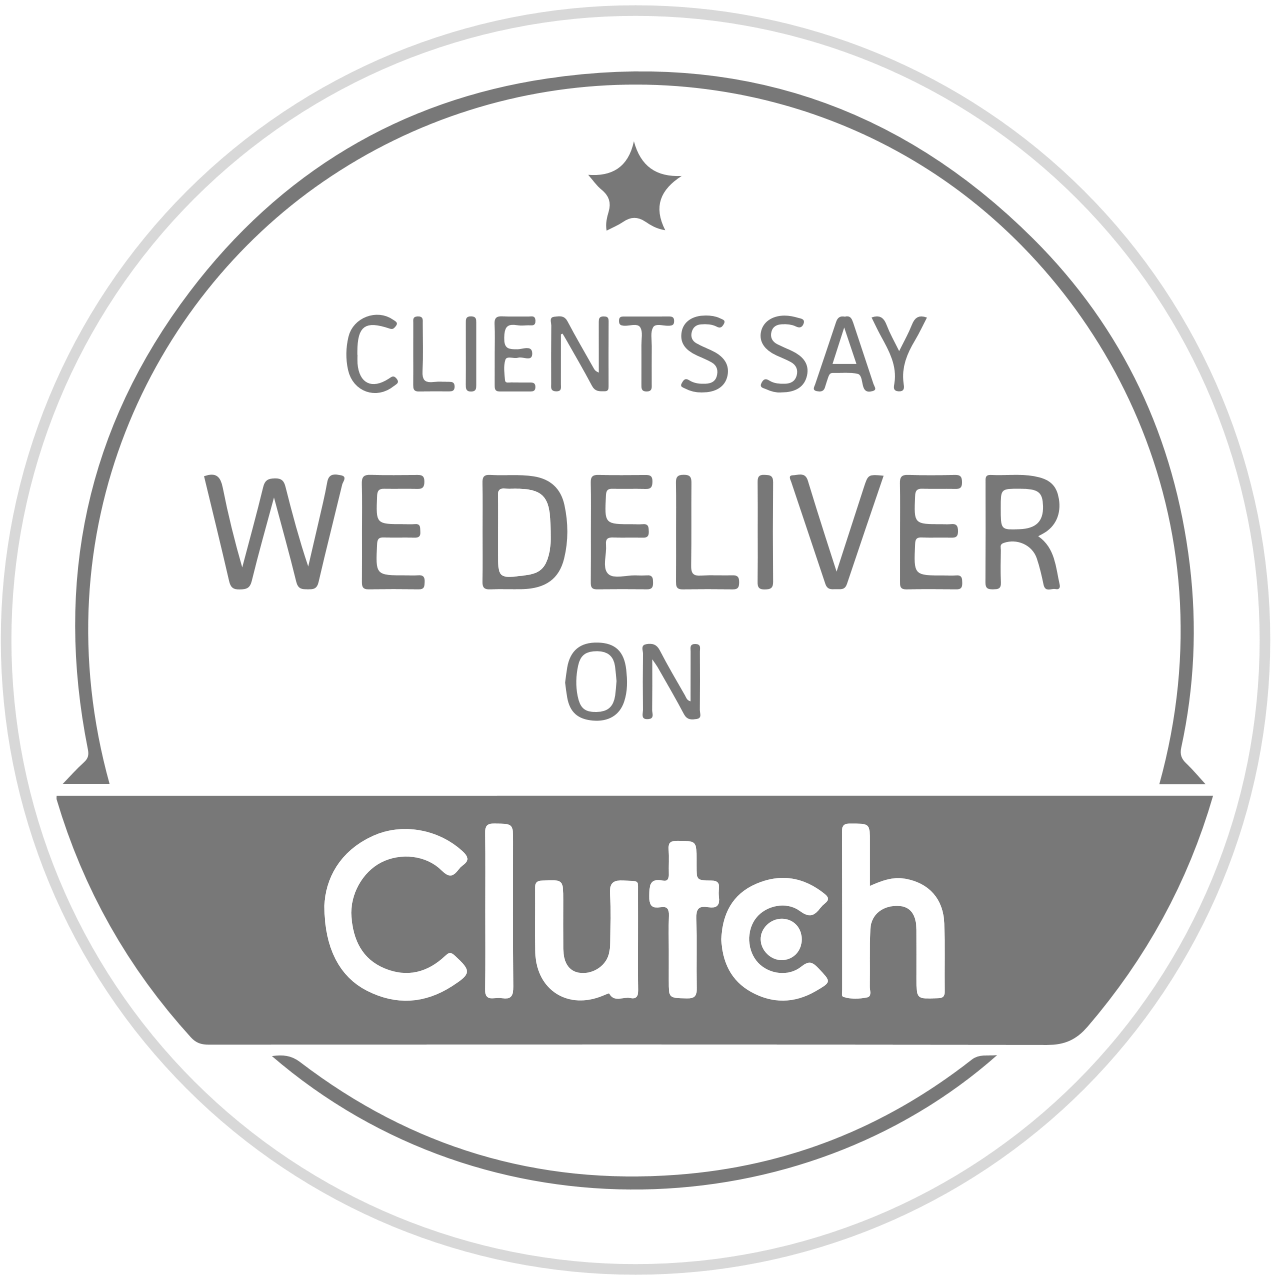 clutch-deliver